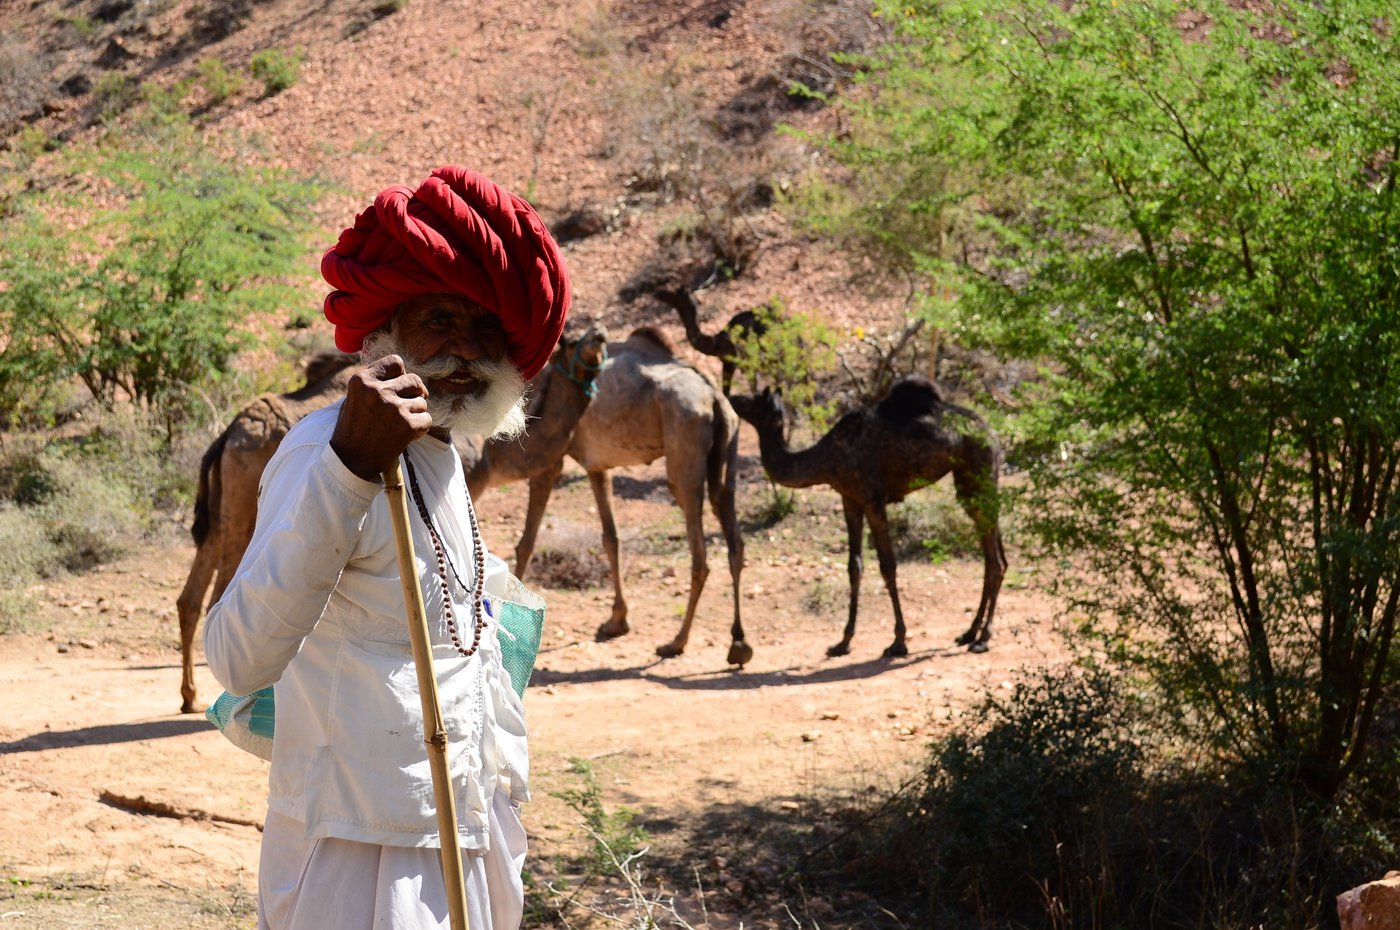 Fuyaramji stands guard while his camels are busy eating